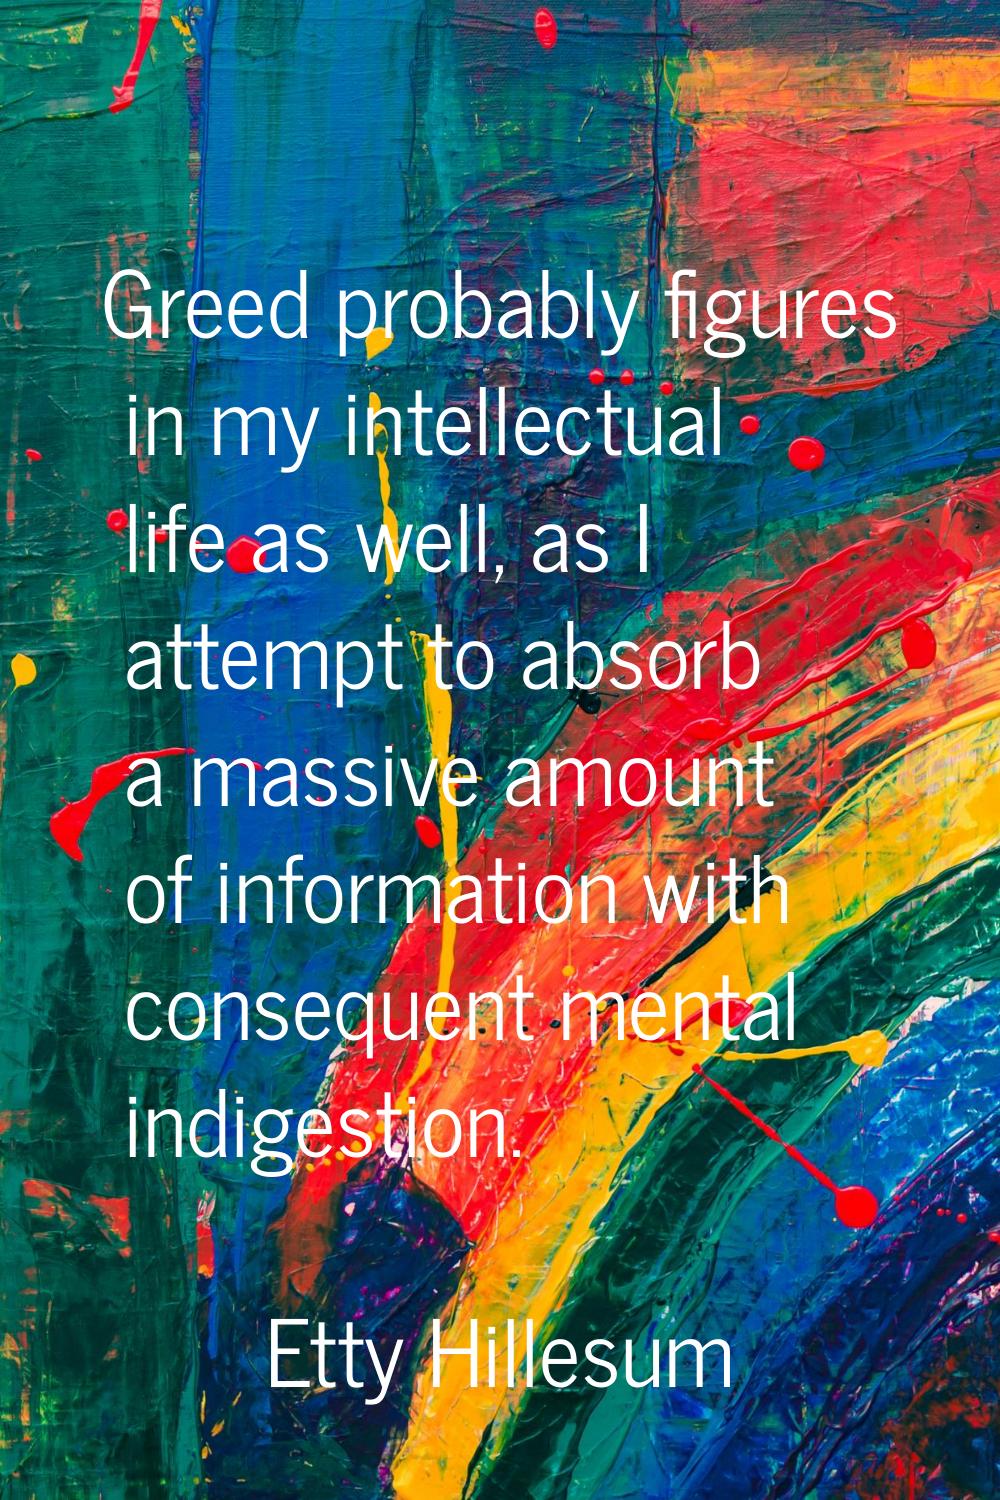 Greed probably figures in my intellectual life as well, as I attempt to absorb a massive amount of 